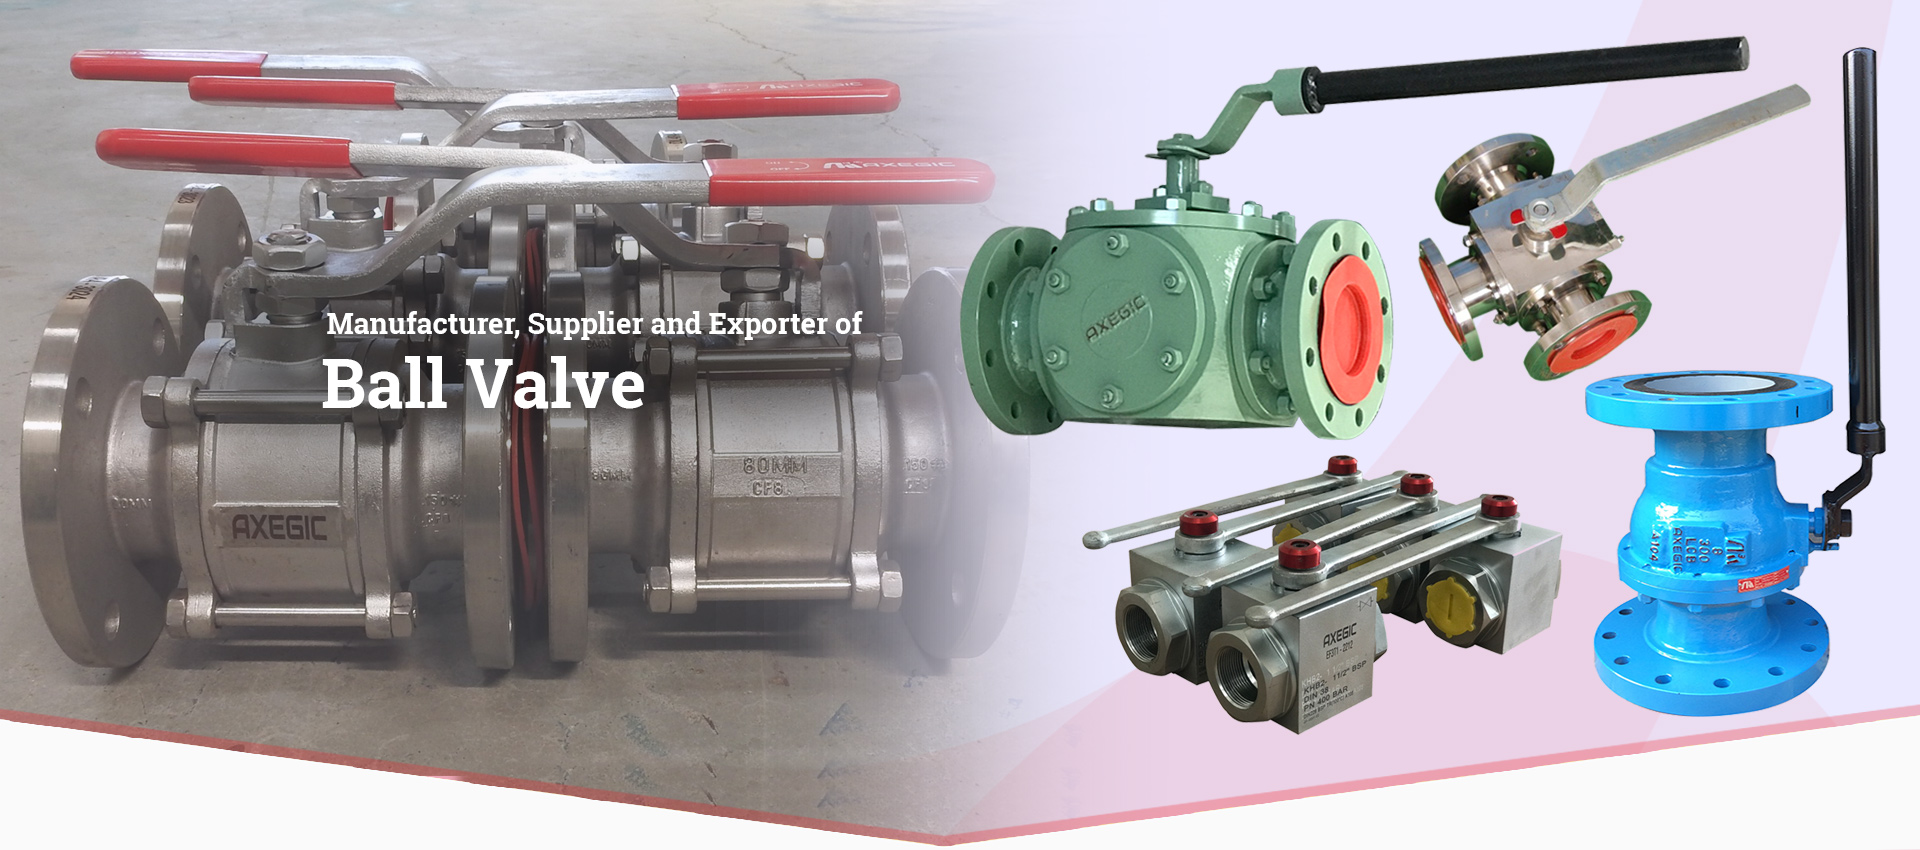 Manufacturer, Supplier and Exporter of Ball Valve